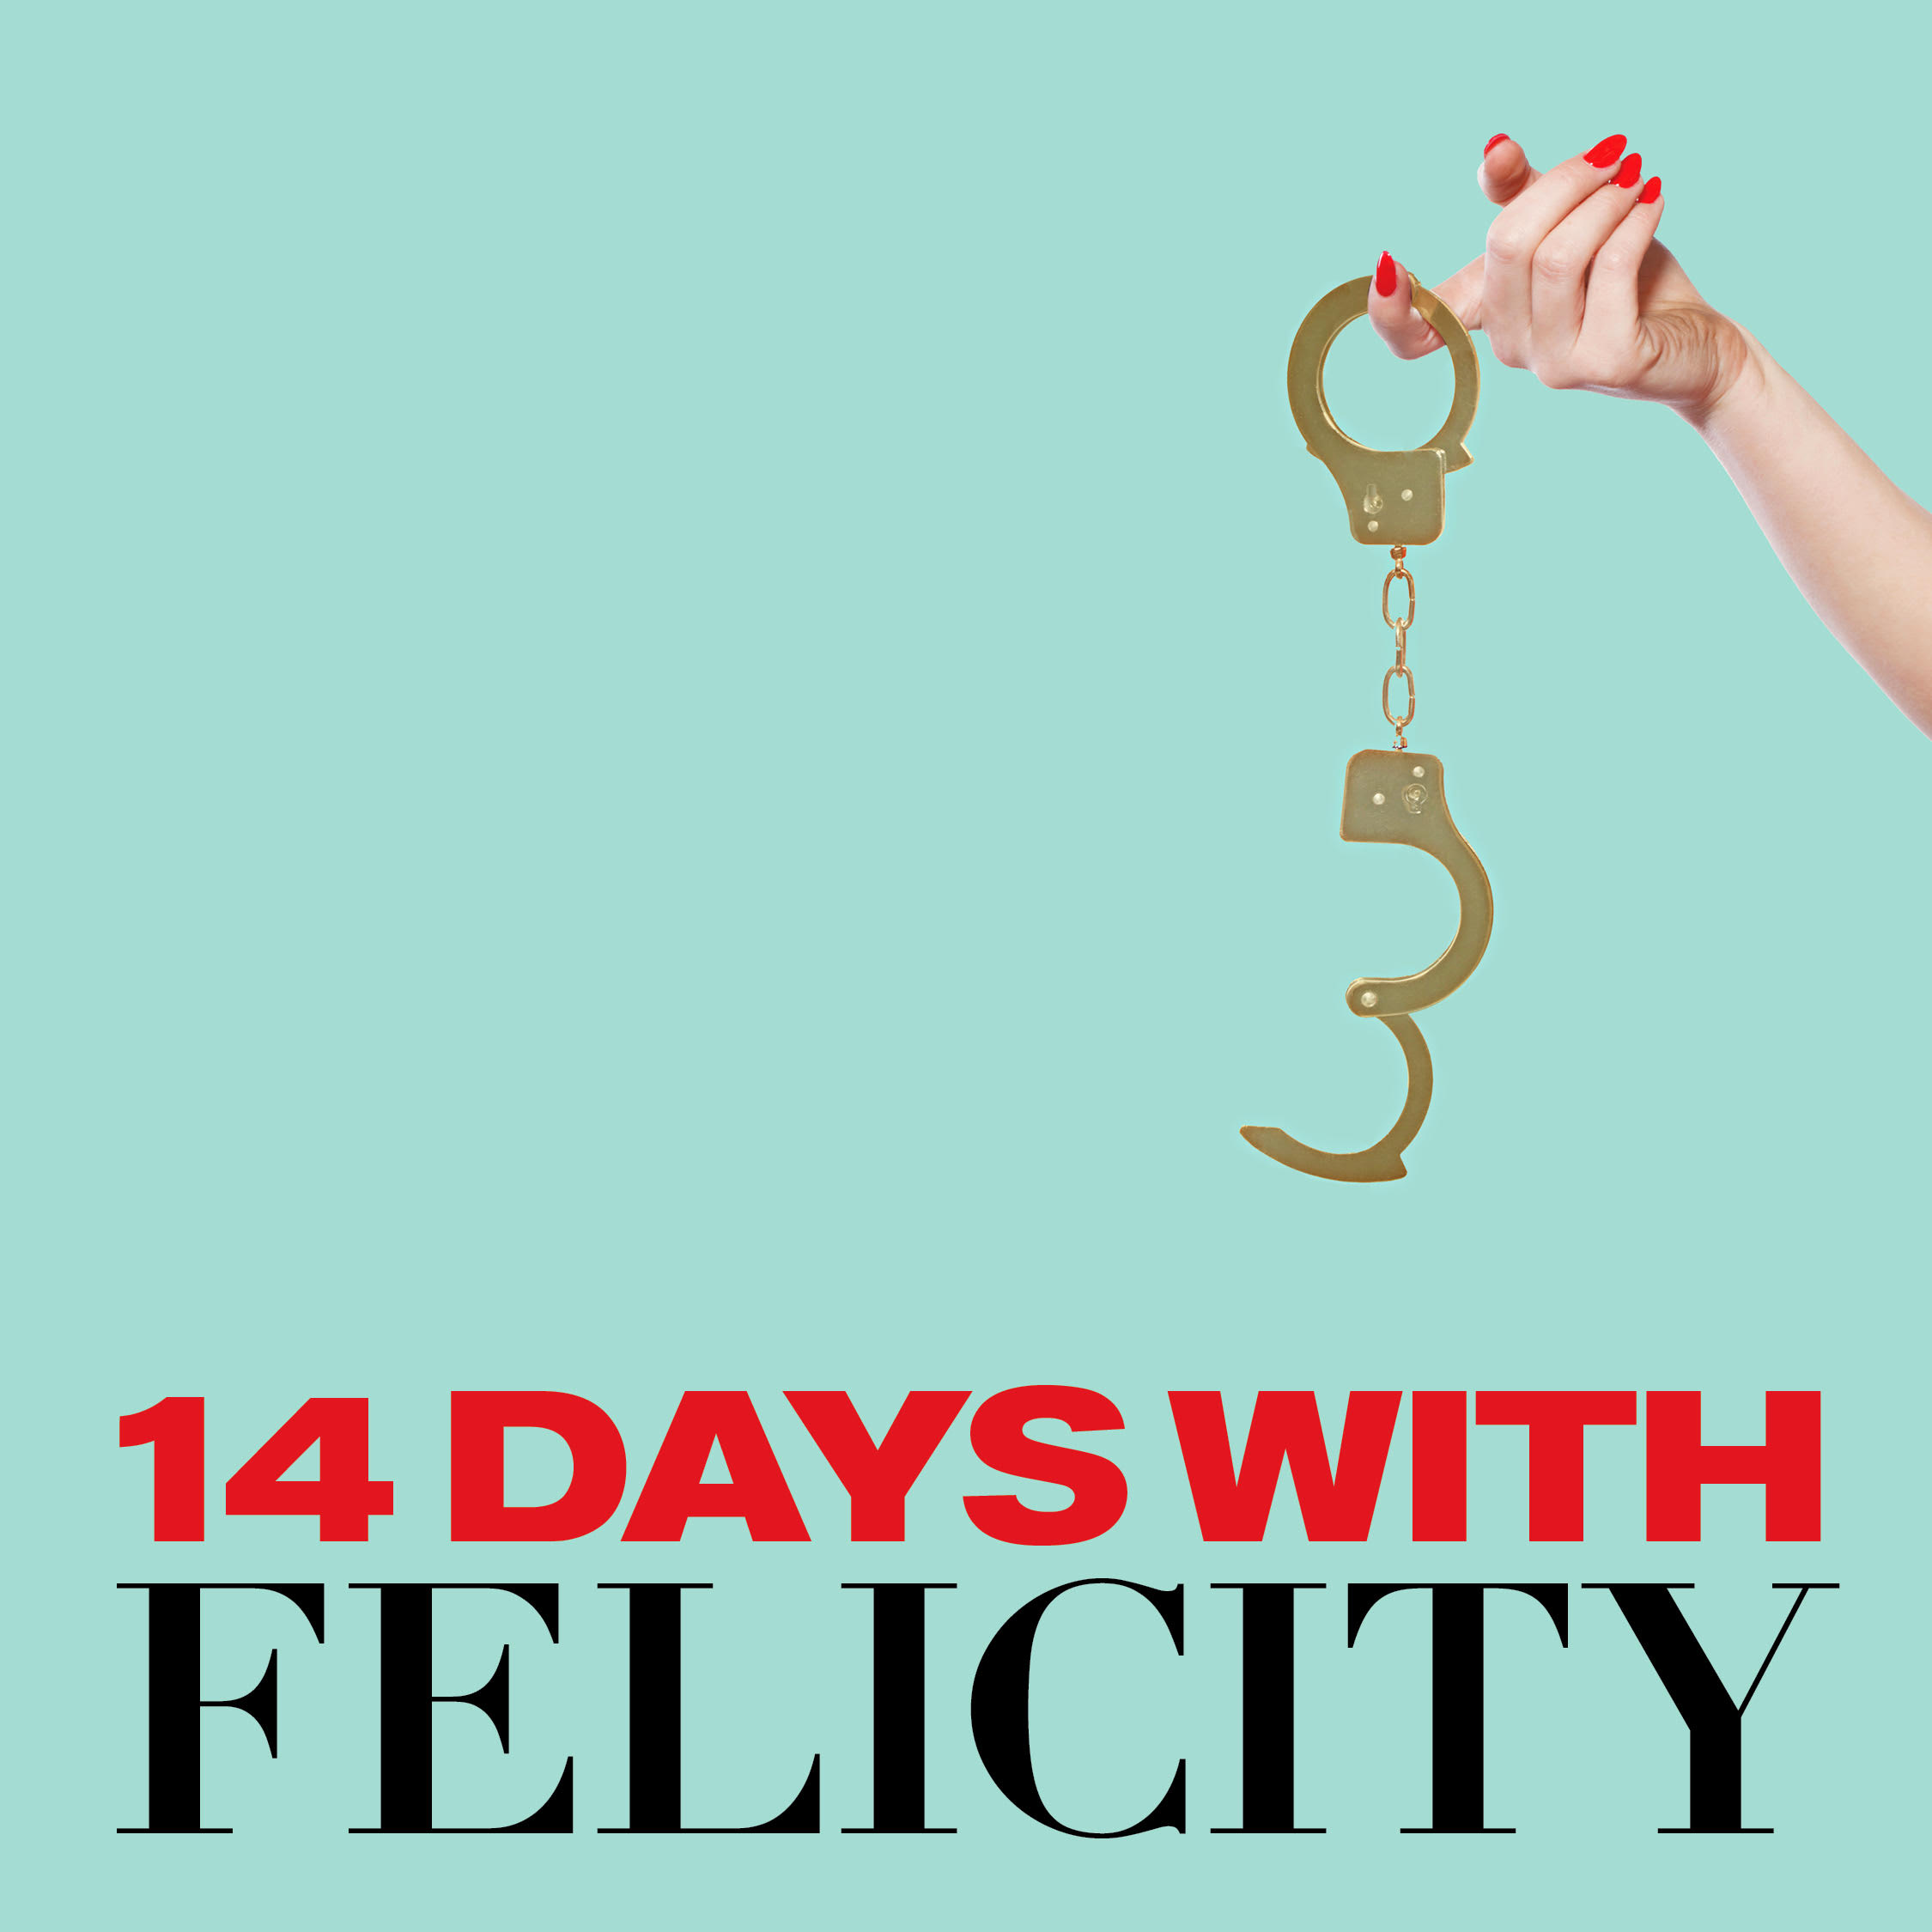 New Series: 14 Days with Felicity